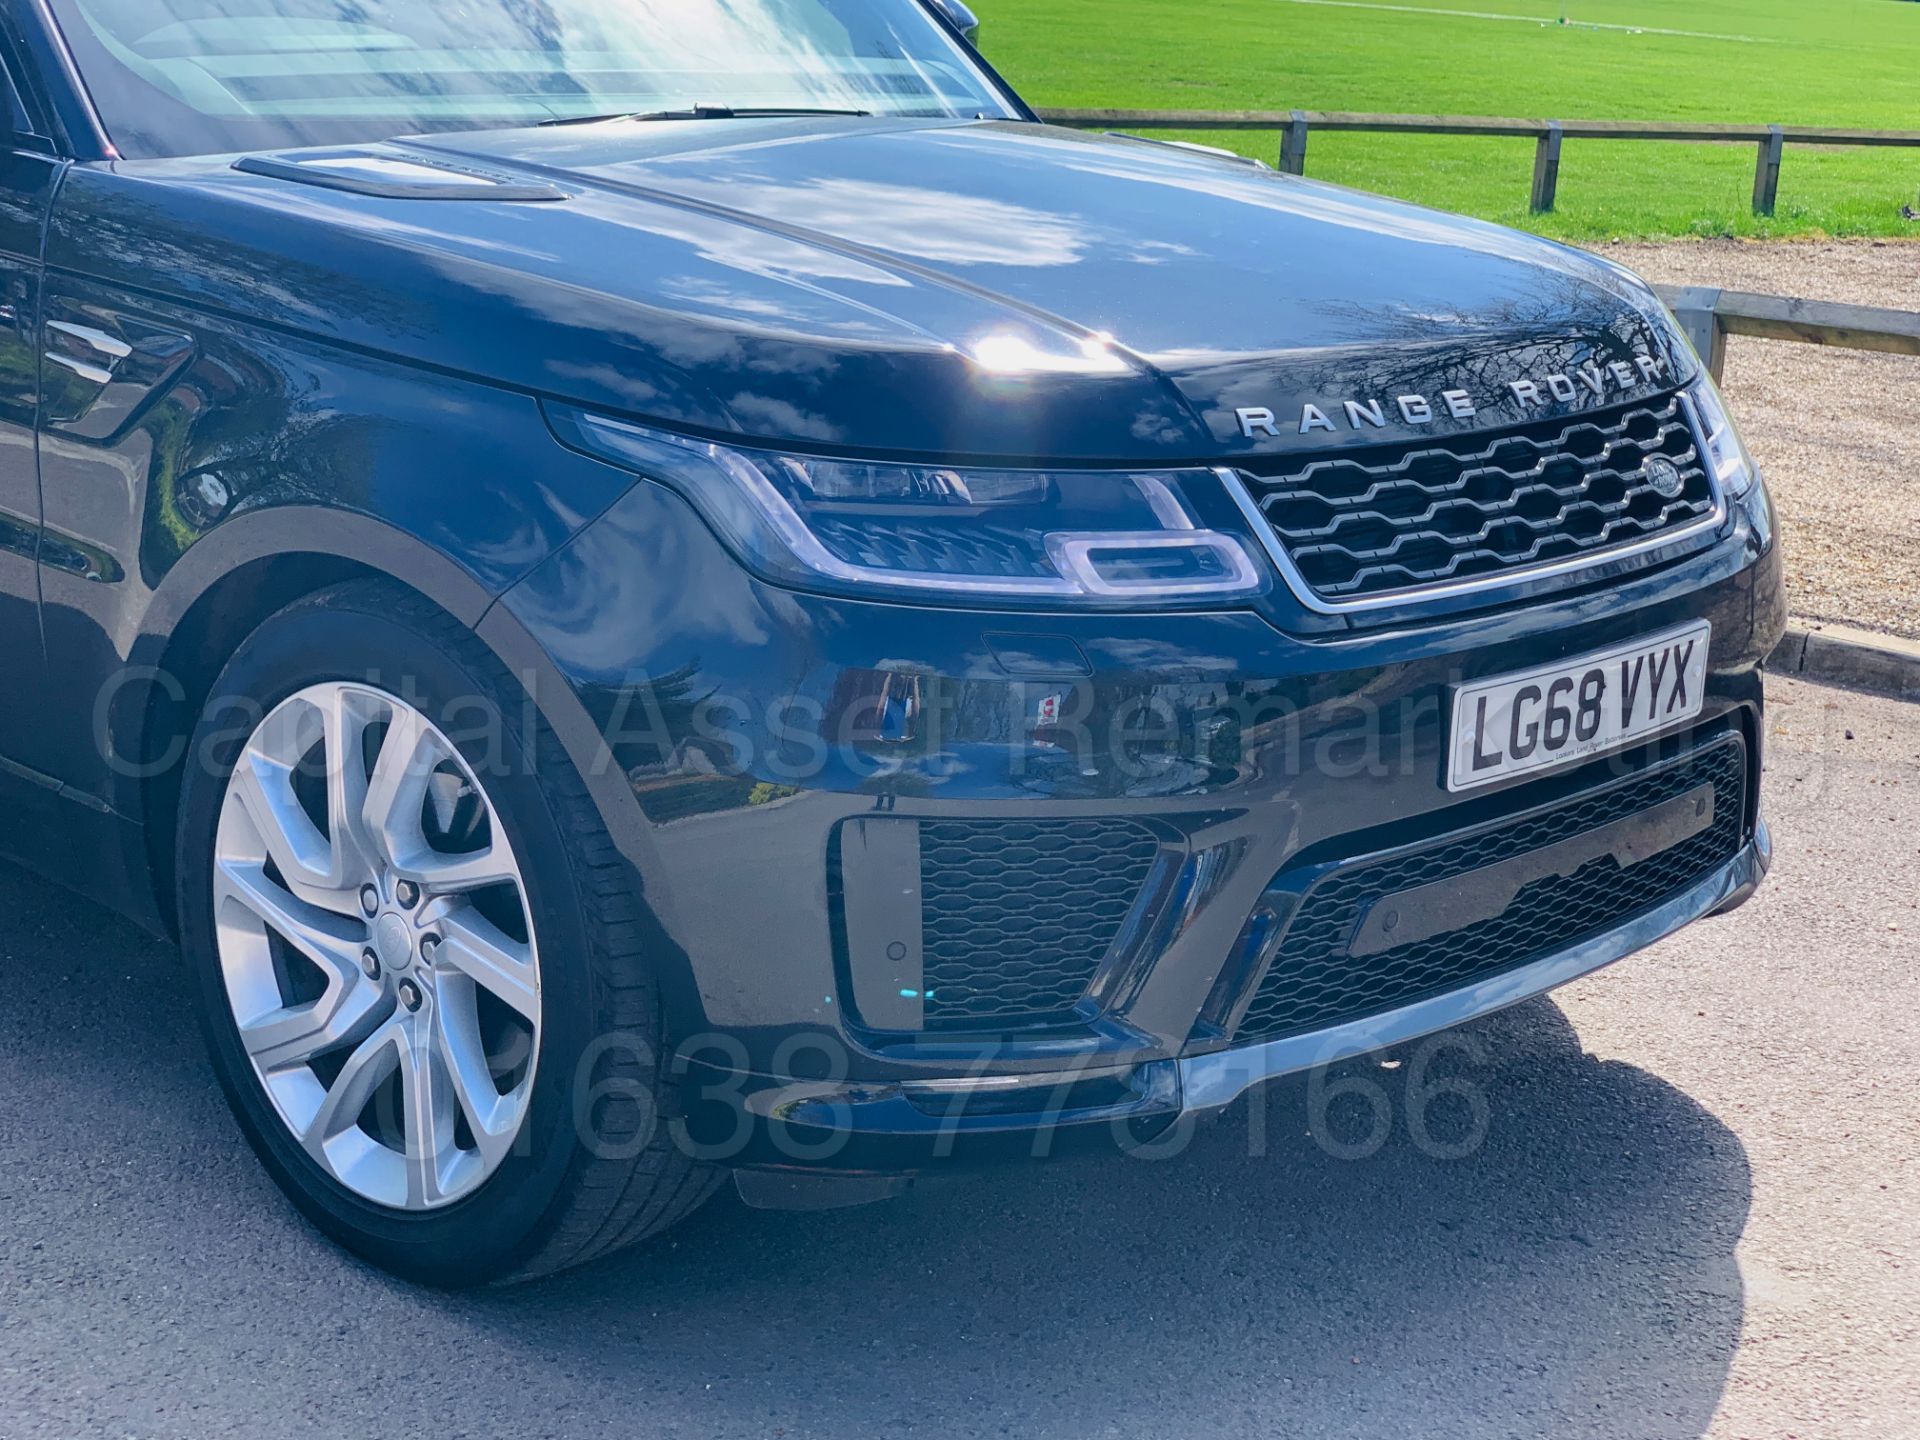 (ON SALE) RANGE ROVER SPORT *HSE* (2019 - ALL NEW MODEL) '3.0 SDV6 - 306 BHP - 8 SPEED AUTO' - Image 13 of 73